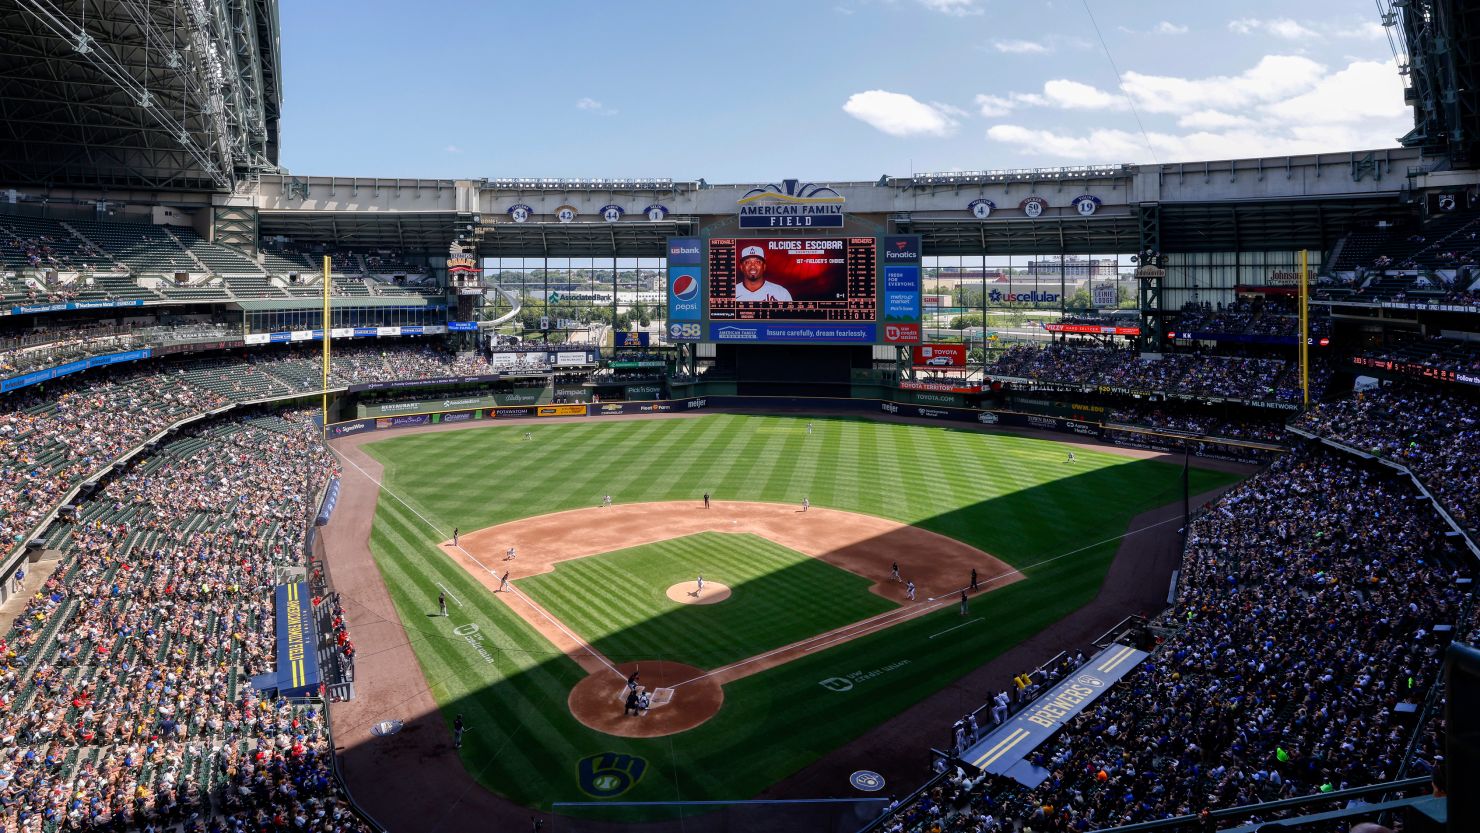 A view of a Major League Baseball game at American Family Field in Milwaukee between the Milwaukee Brewers and Washington Nationals on August 22, 2021.